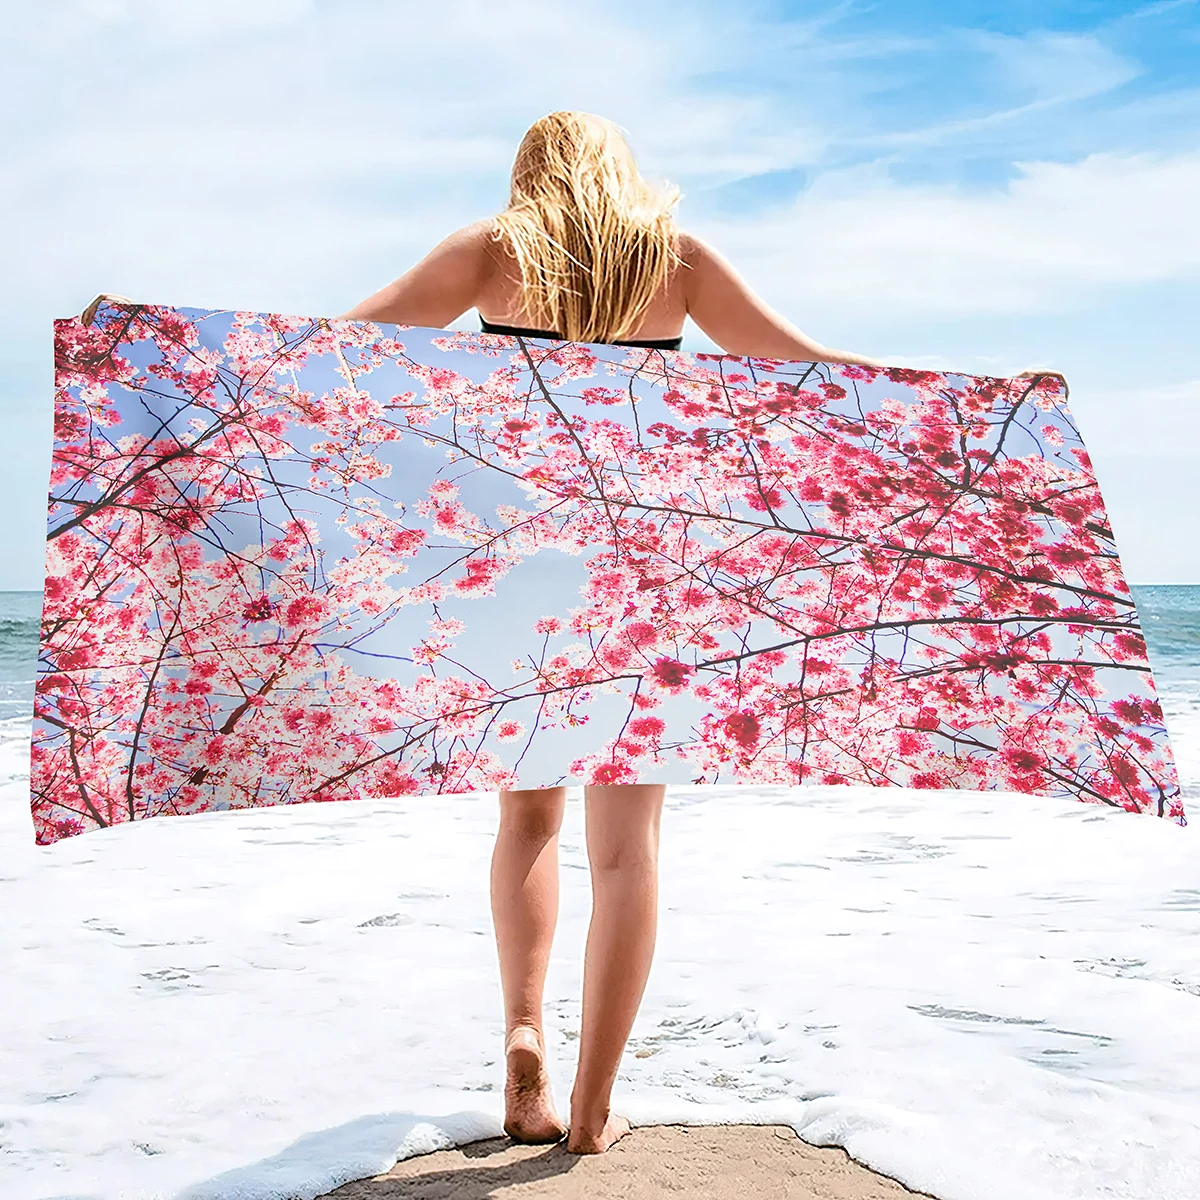 

Plum Blossom Beach Towels,Oversized Travel Beach Towels Blanket Sand Free Quick Dry Absorbent Portable Pool Towels Bath Towel